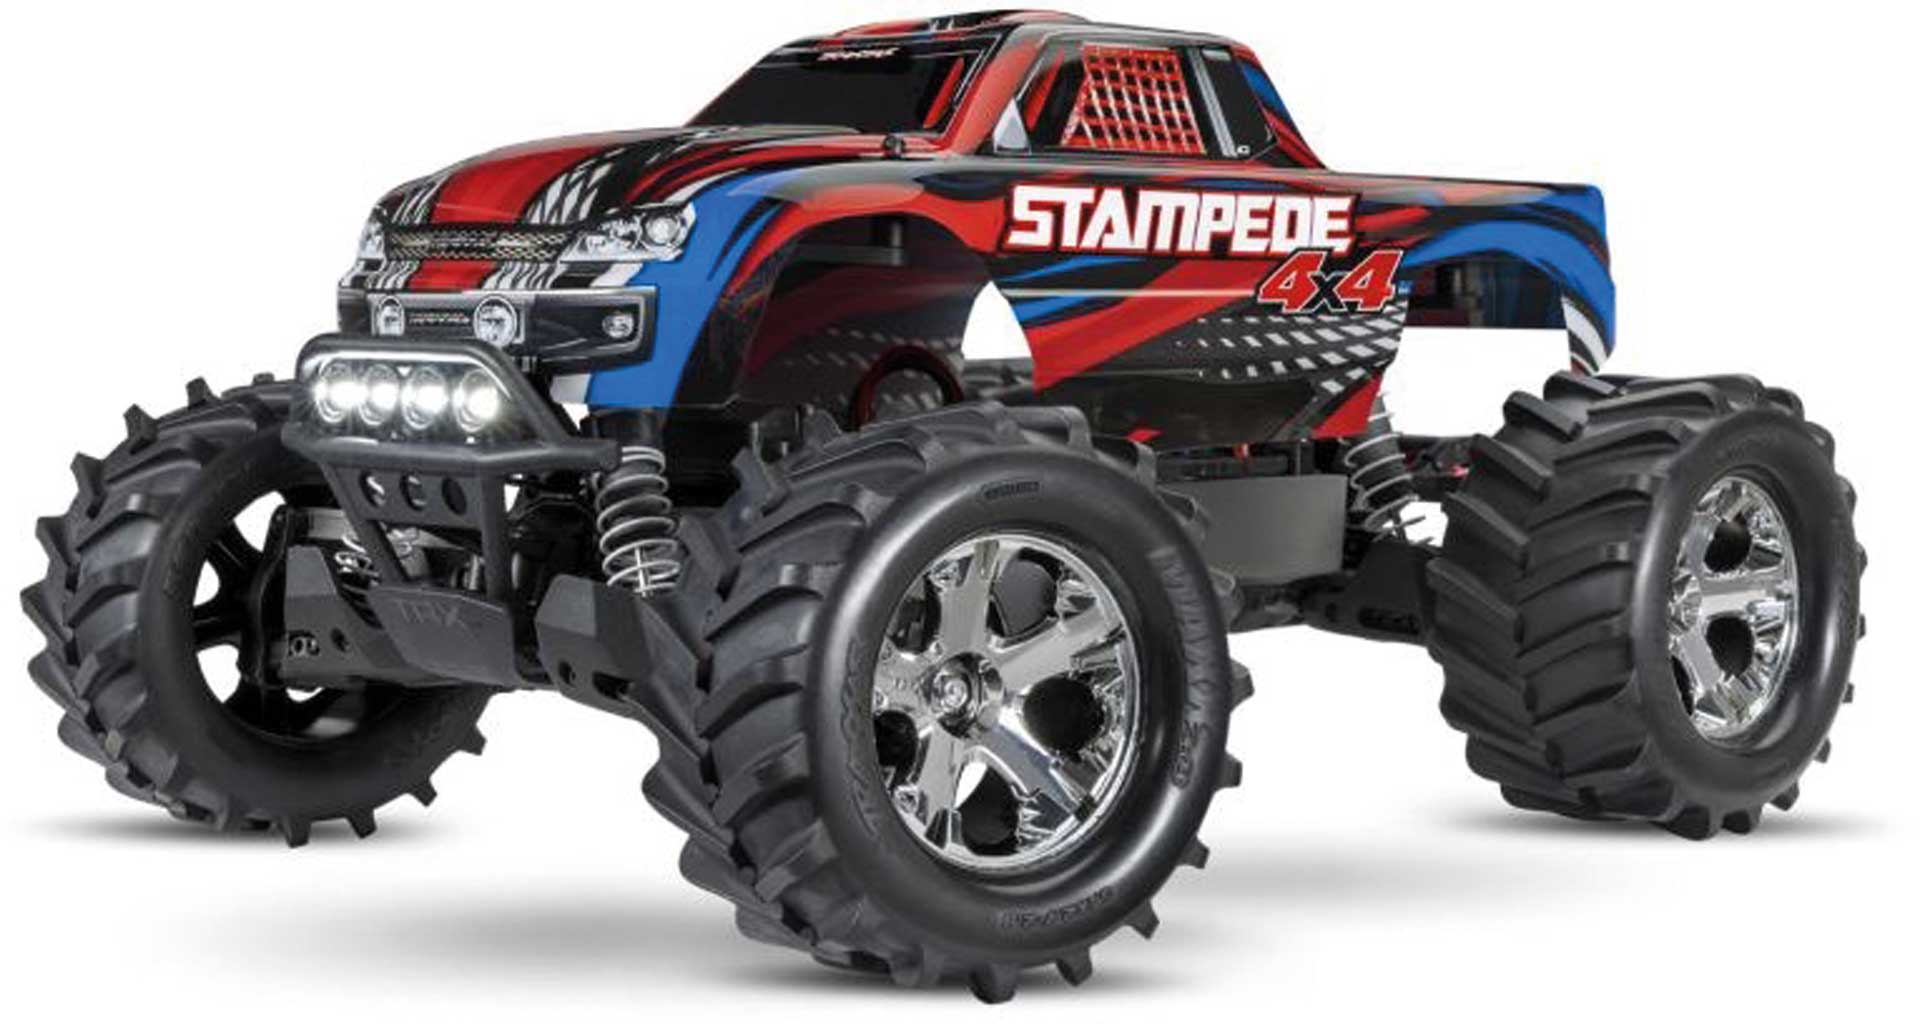 TRAXXAS STAMPEDE 4X4 rouge  RTR avec  accu +LED-LICHT 1/10 4WD MONSTER TRUCK (12T+XL-5)